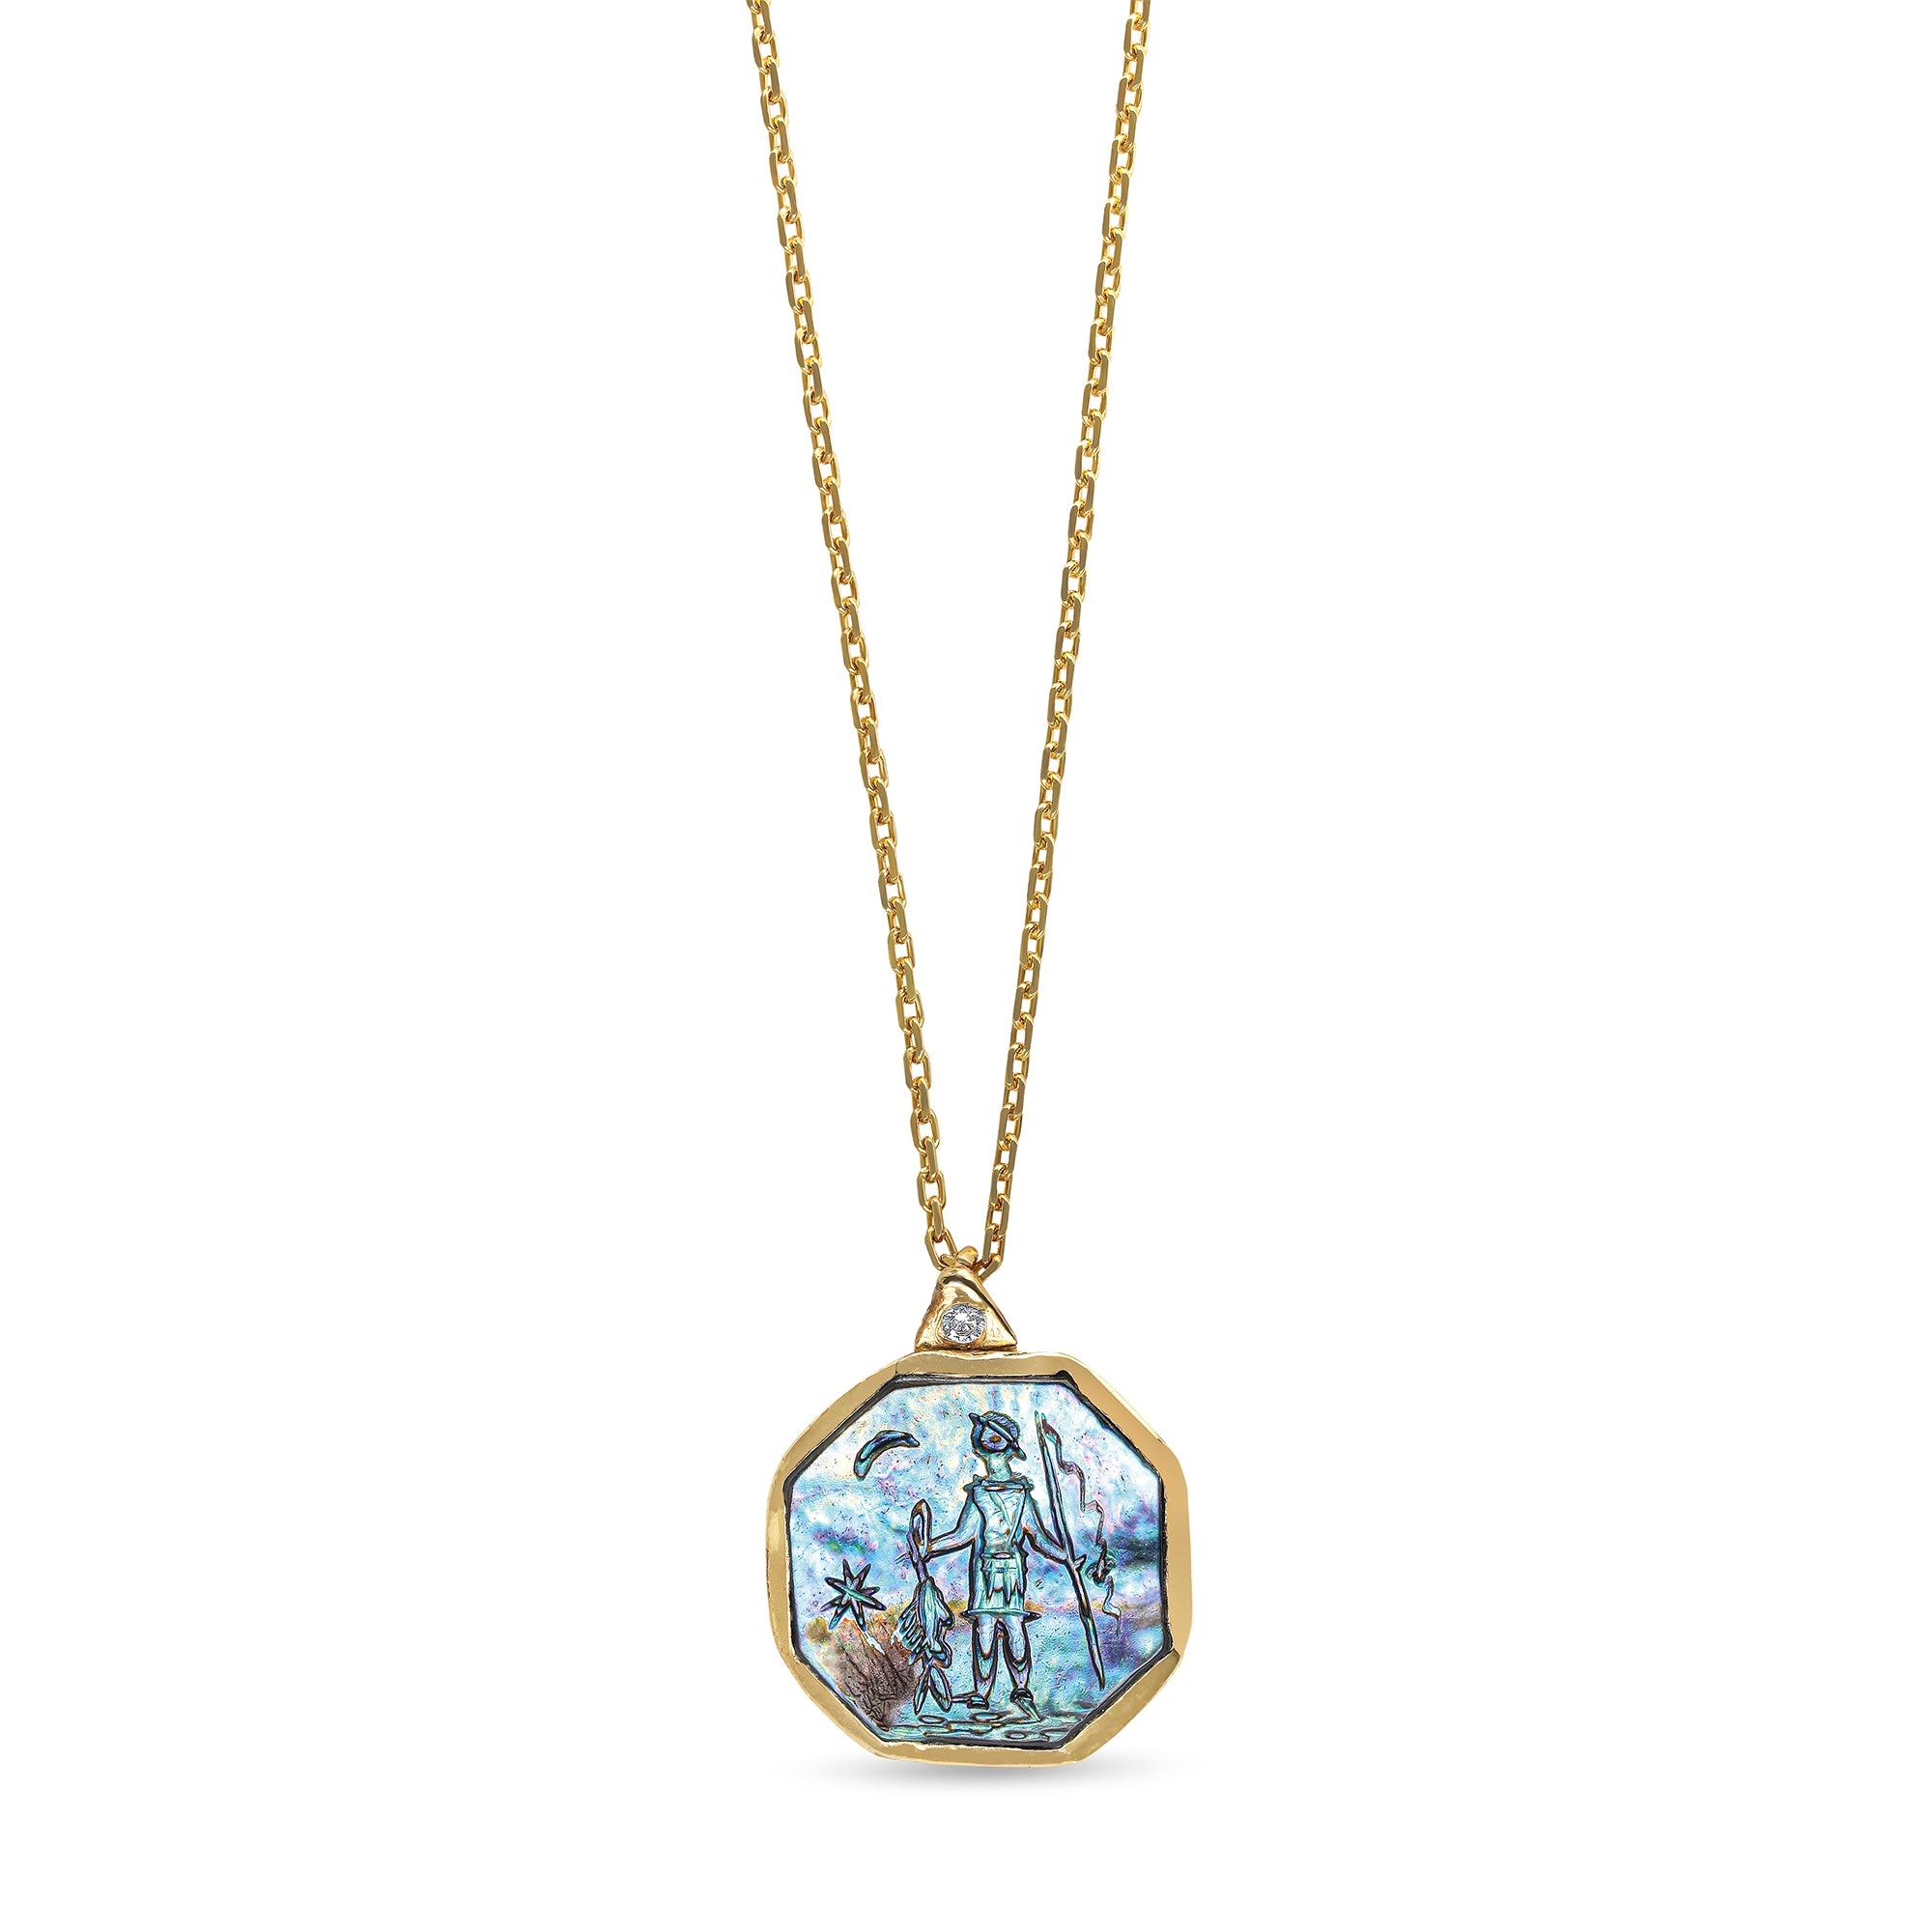 THE GLAUCUS NECKLACE